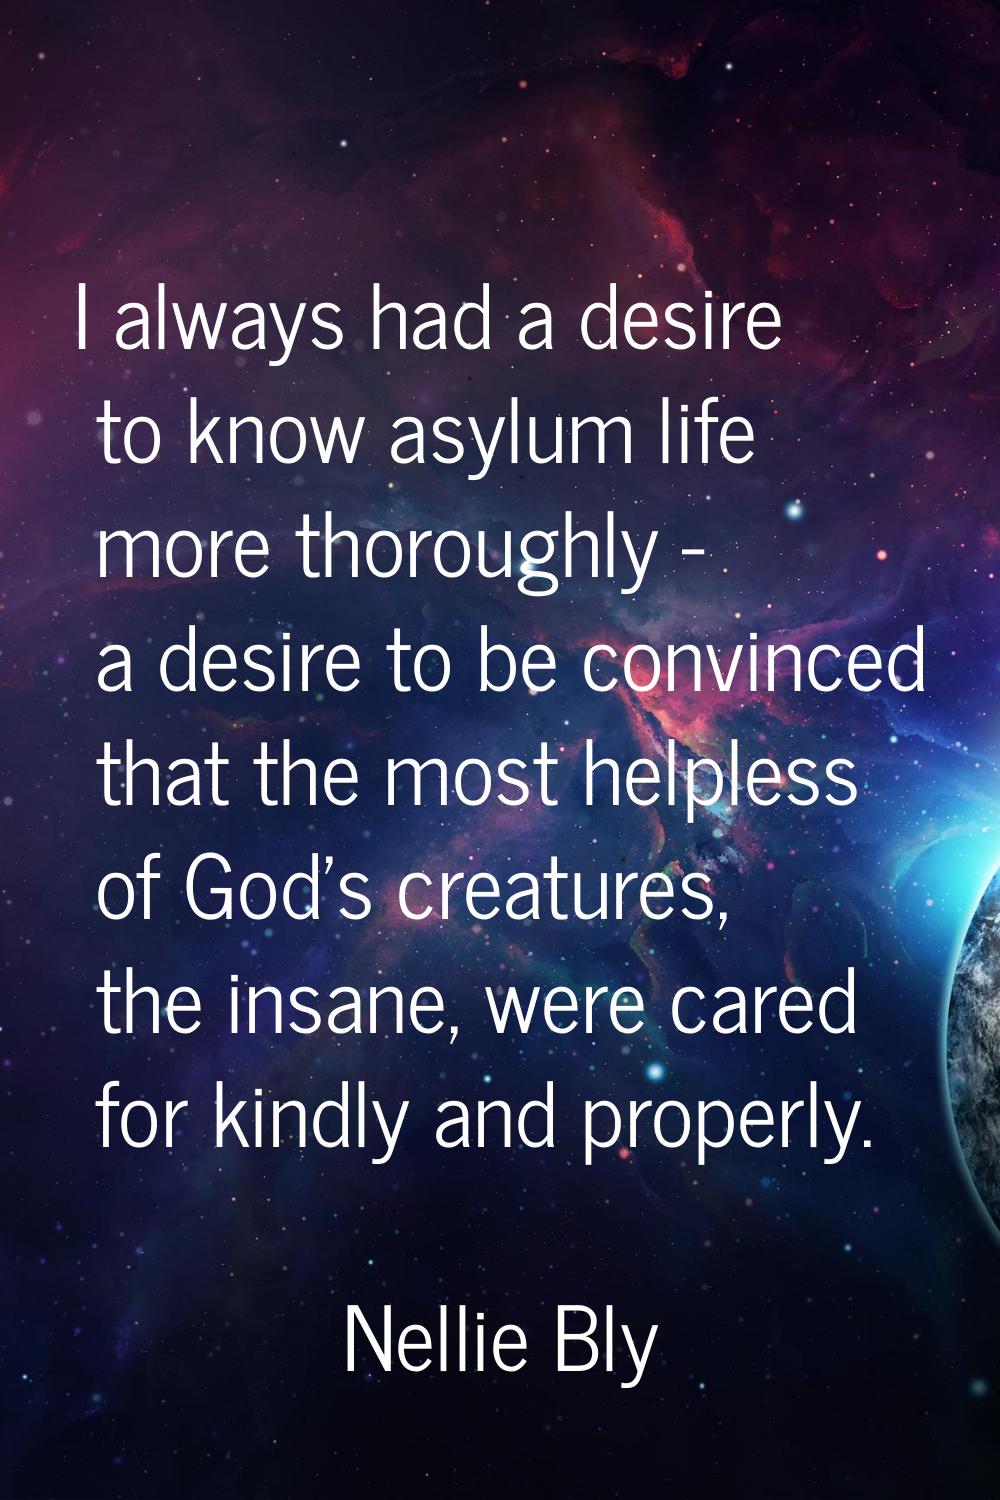 I always had a desire to know asylum life more thoroughly - a desire to be convinced that the most 